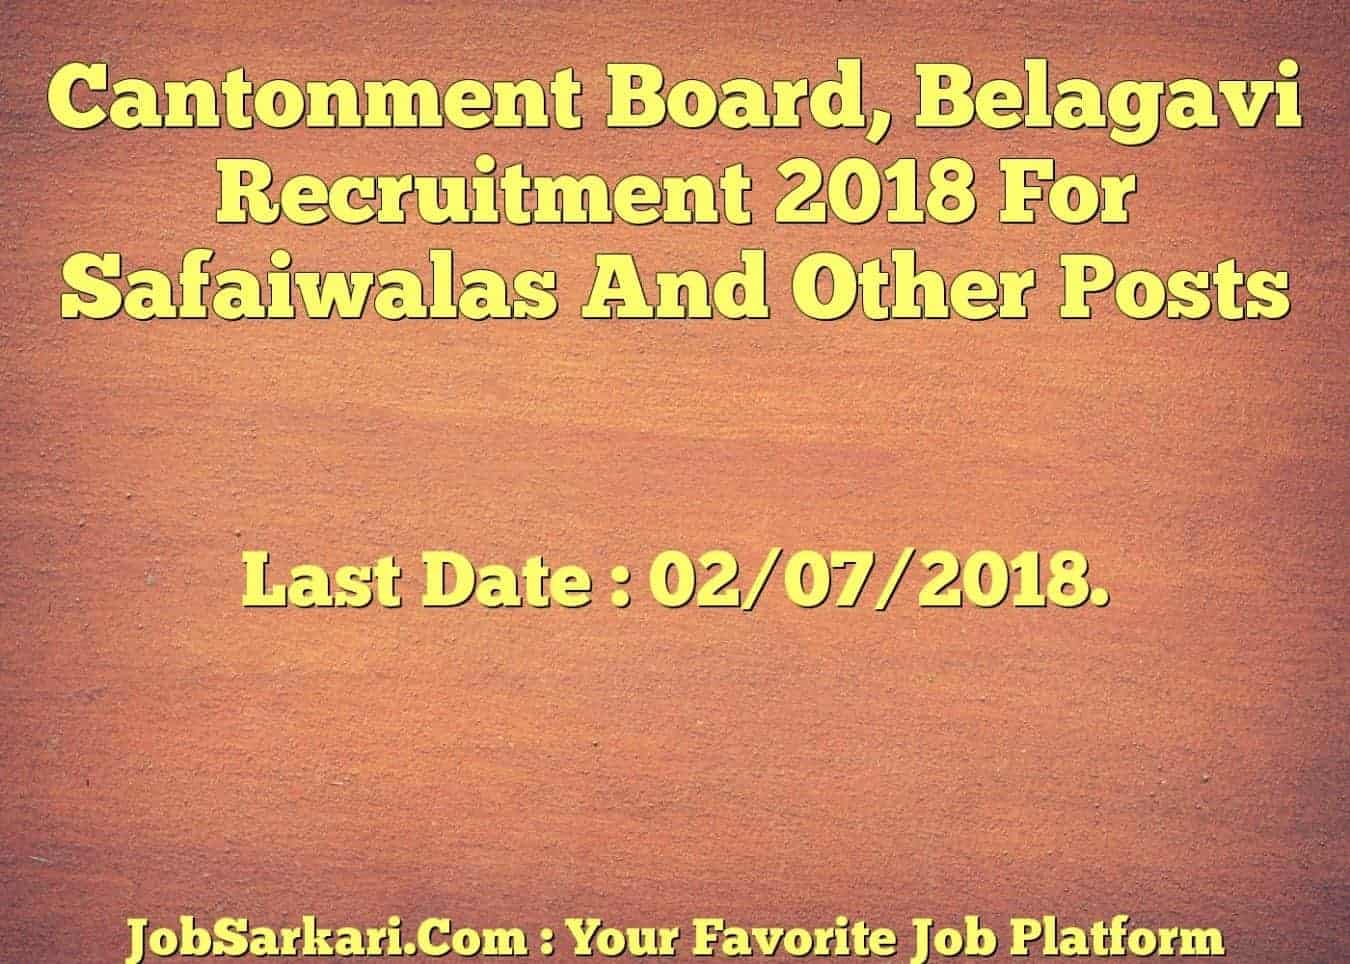 Cantonment Board, Belagavi Recruitment 2018 For Safaiwala And Other Posts